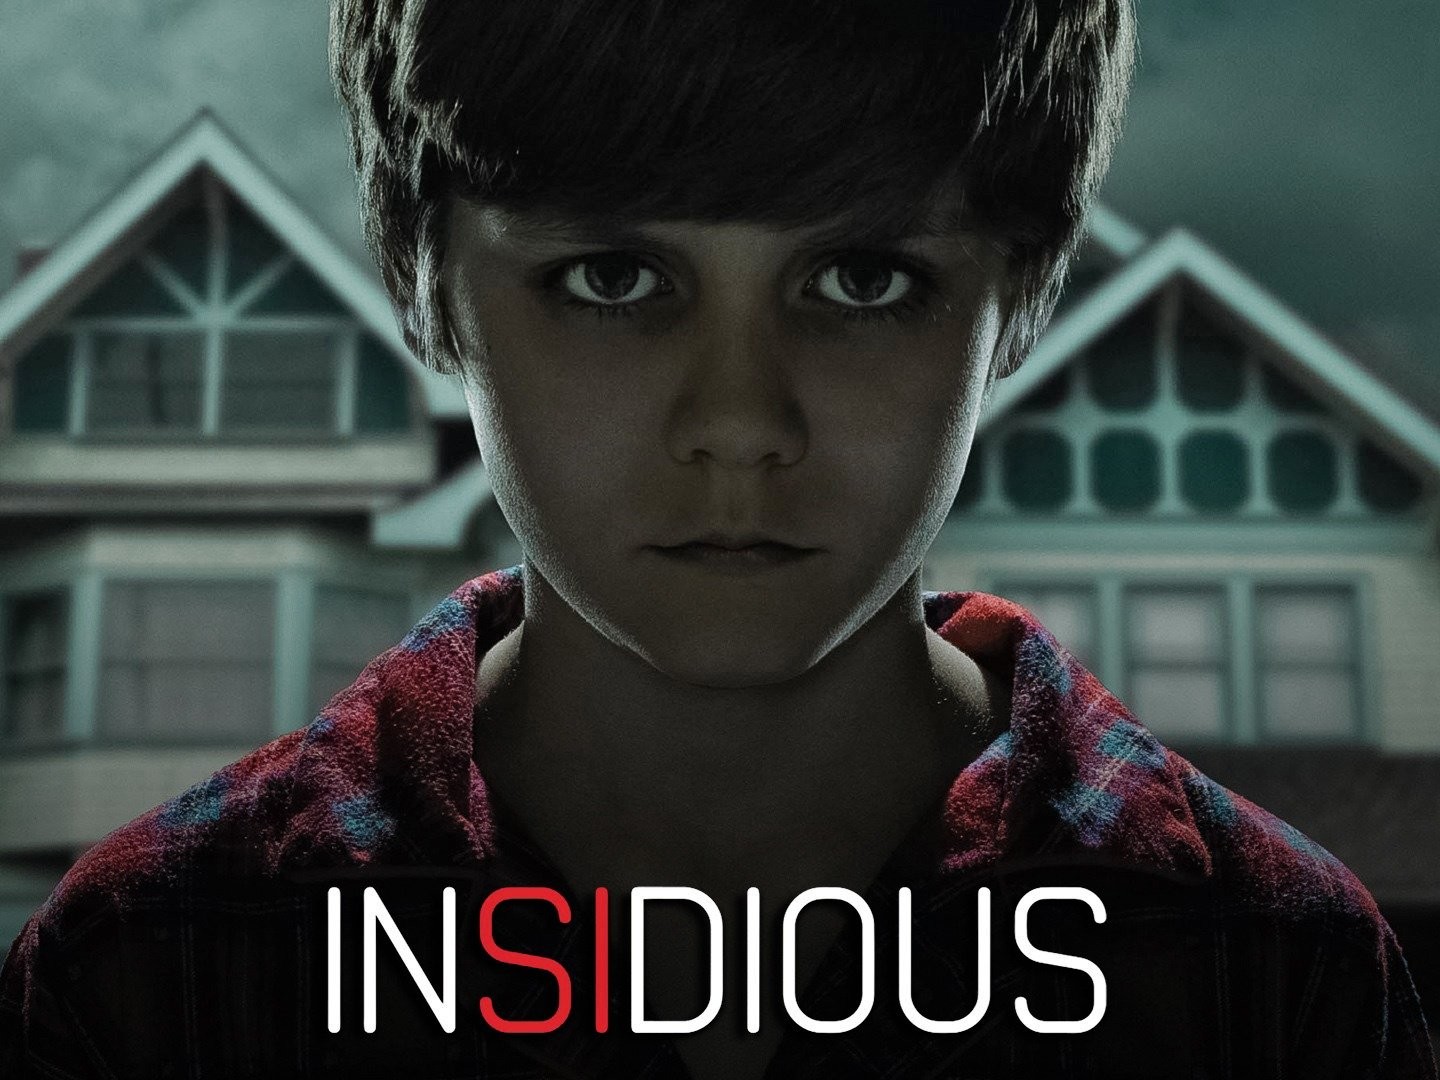 Insidious (Try 3rd part first and then watch 1 and 2 part)